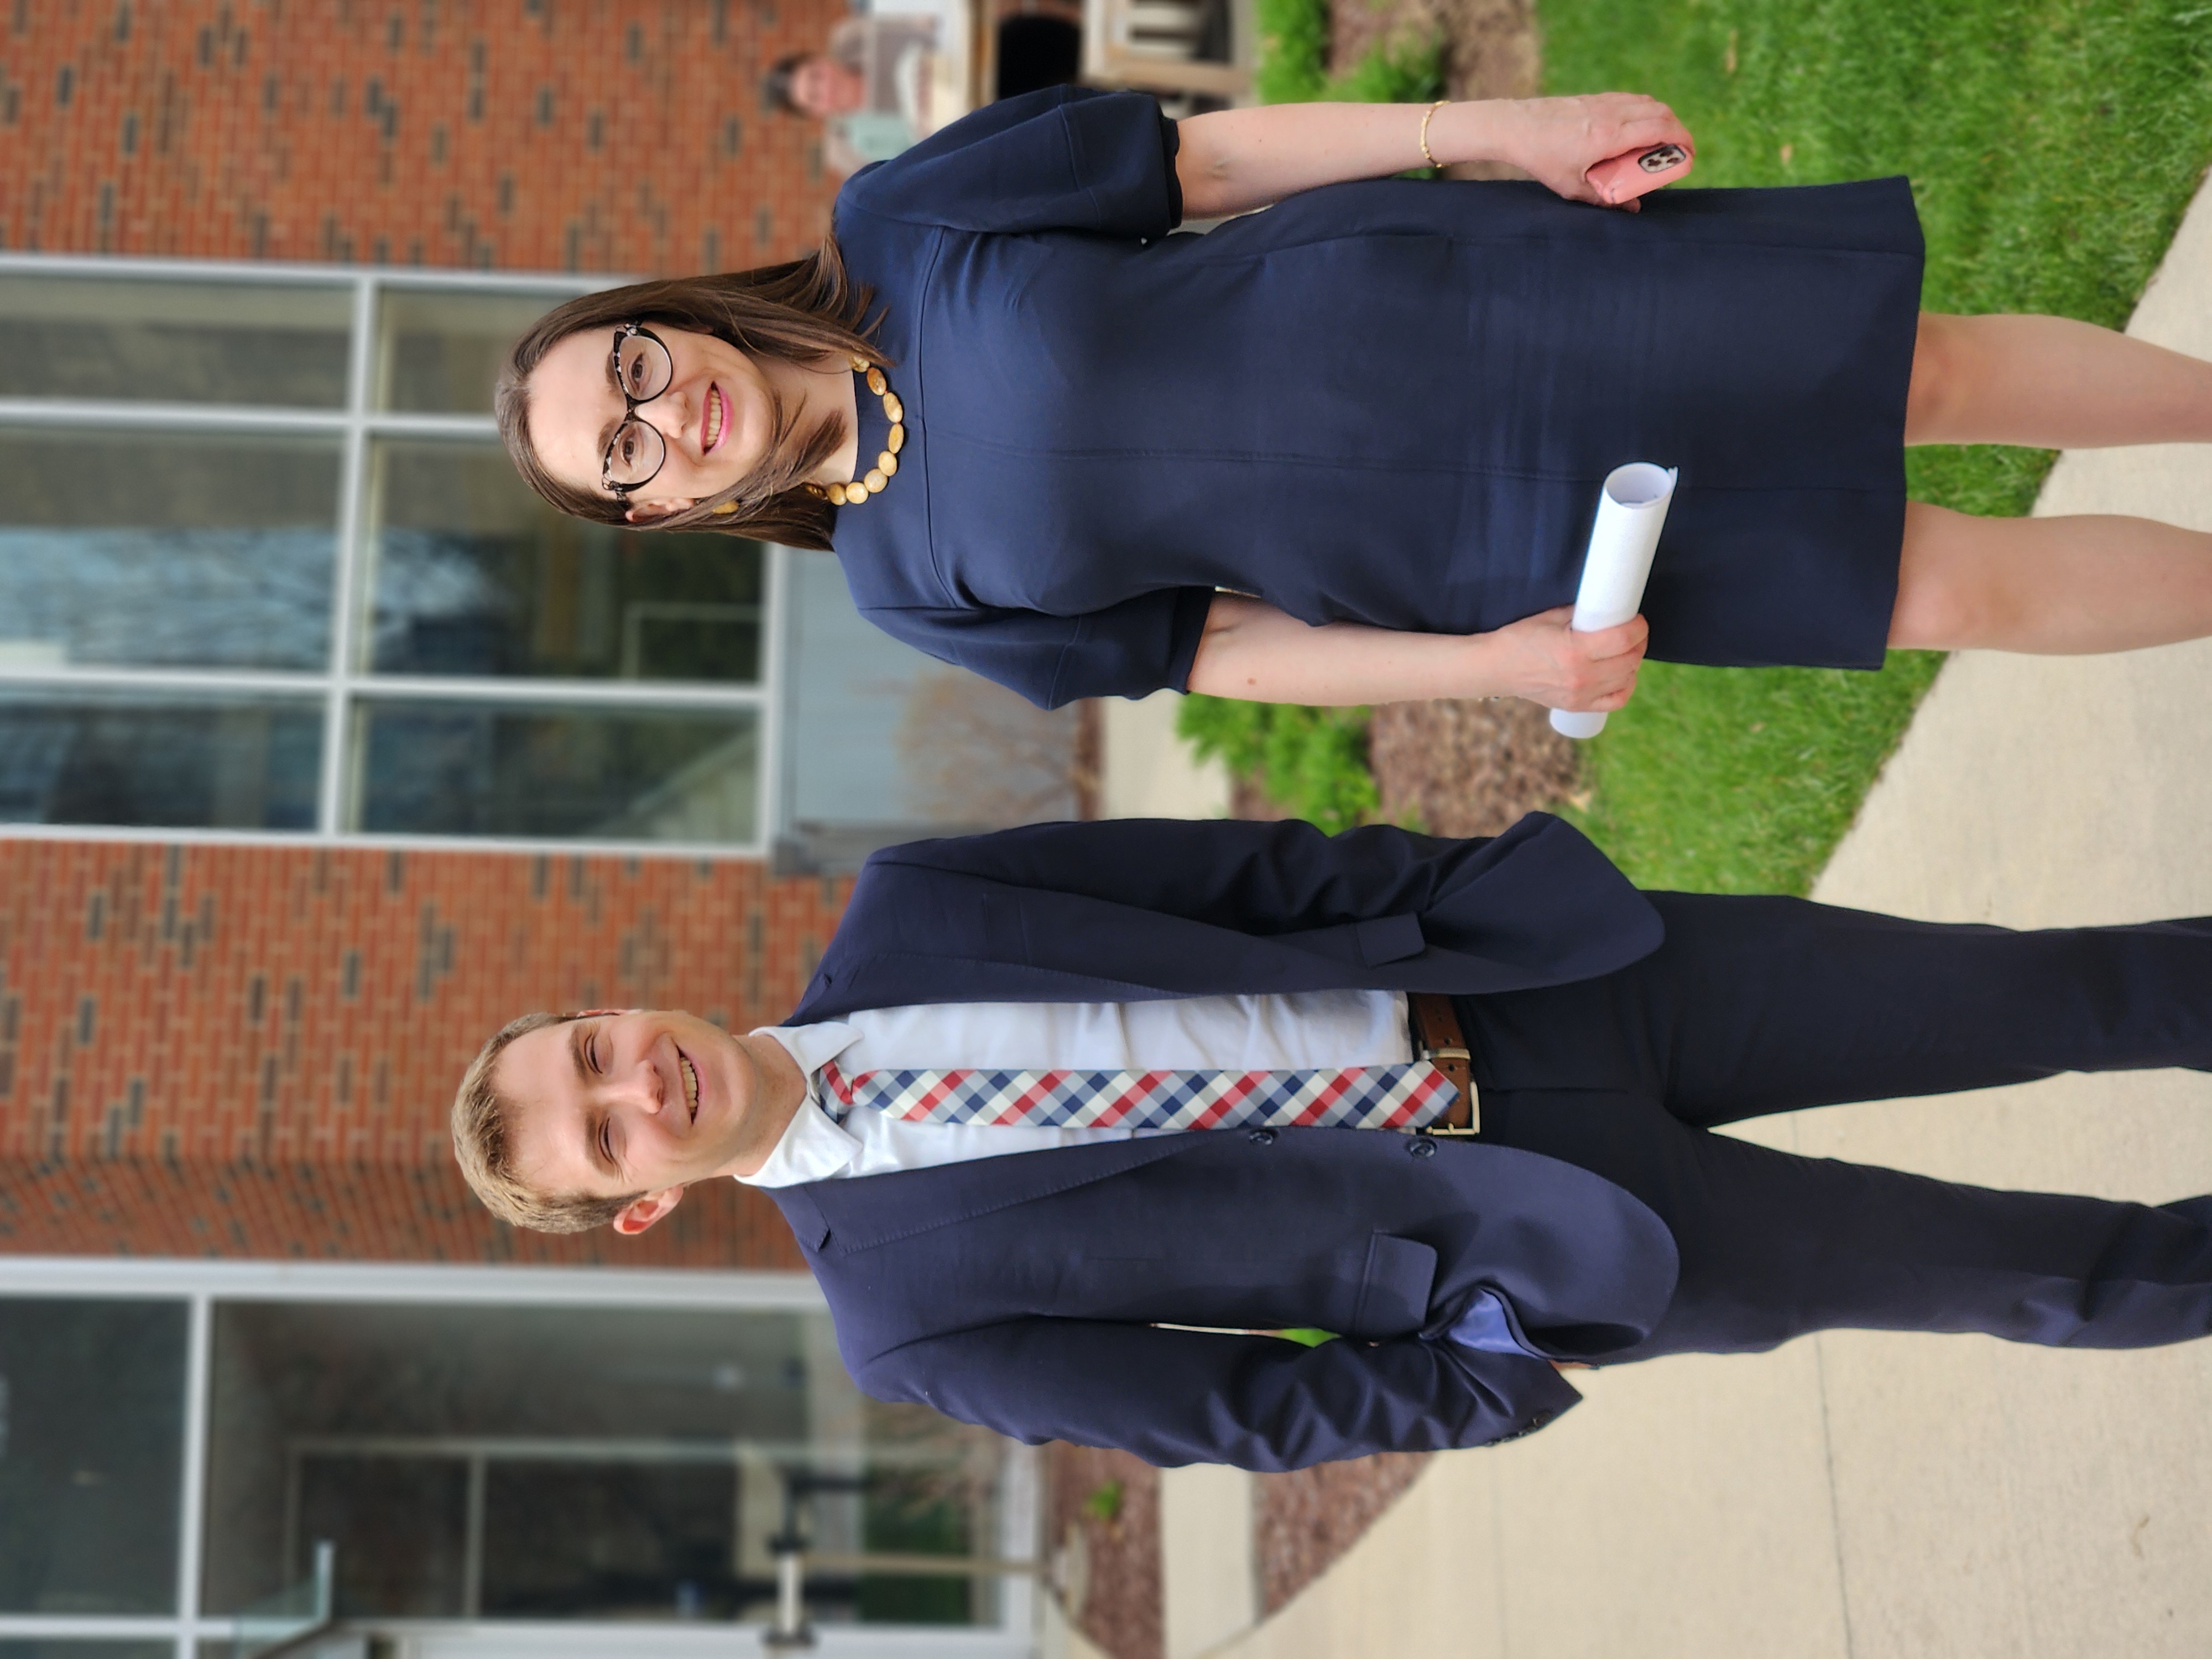 Akron Law Students Step Up with Scholarly Writing